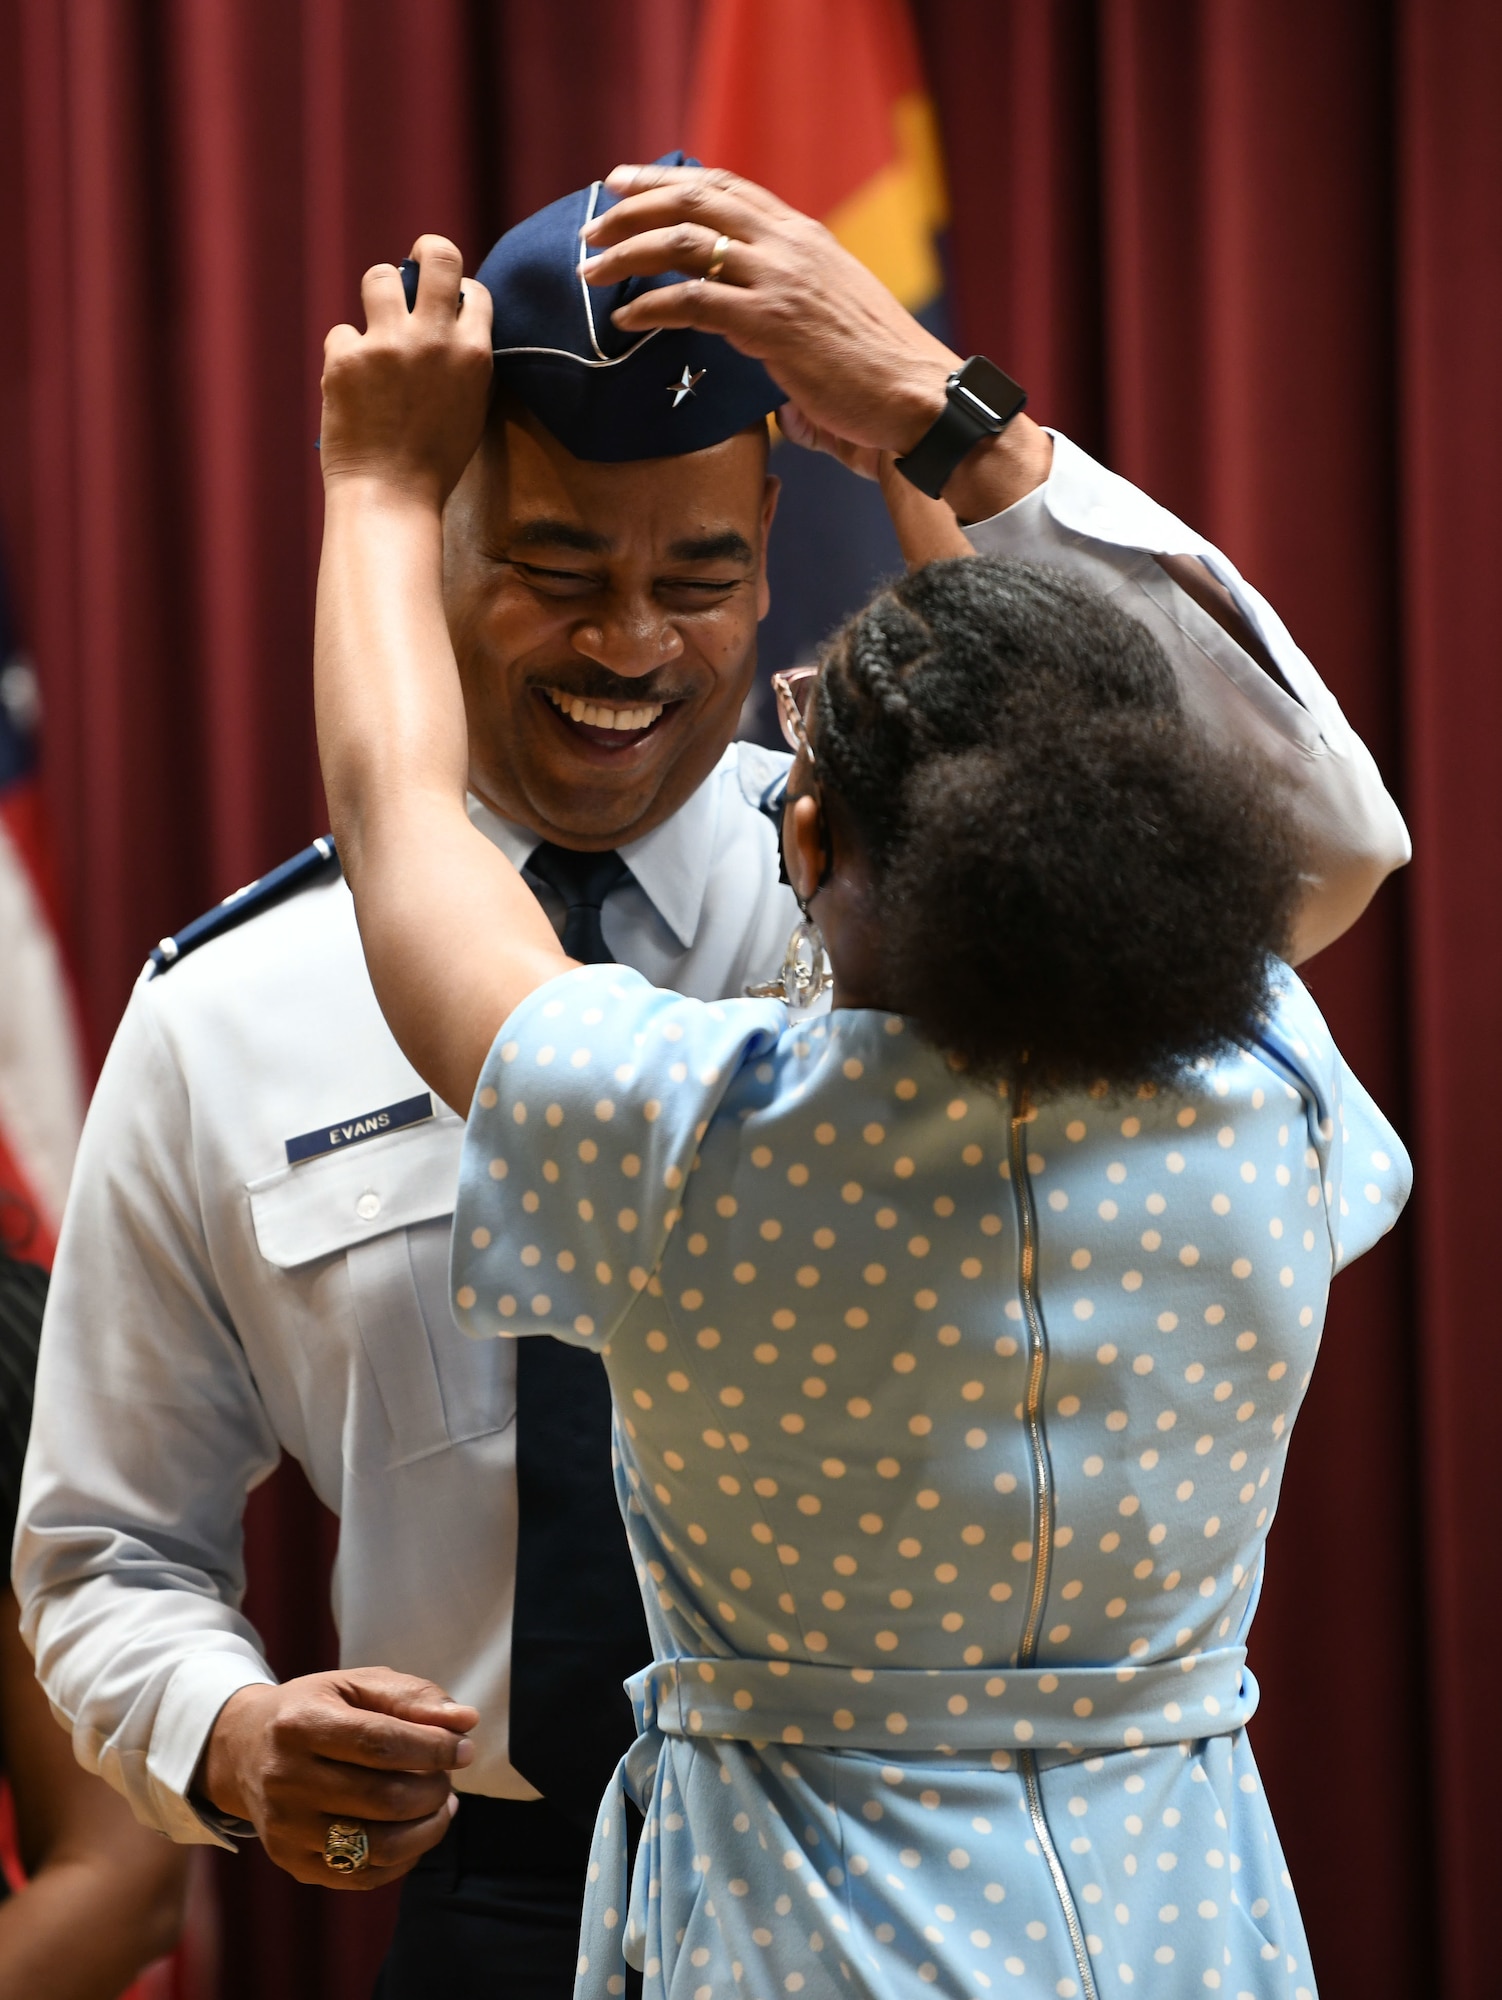 Brig. Gen. Edward H. Evans, Jr., chief of staff, Mississippi Air National Guard, and the first Mississippi Air National Guard member to be promoted to the rank of brigadier general, receives his cover from his daughter during his promotion ceremony at Mississippi National Guard Joint Force Headquarters, Jackson, Mississippi, March 5, 2022.